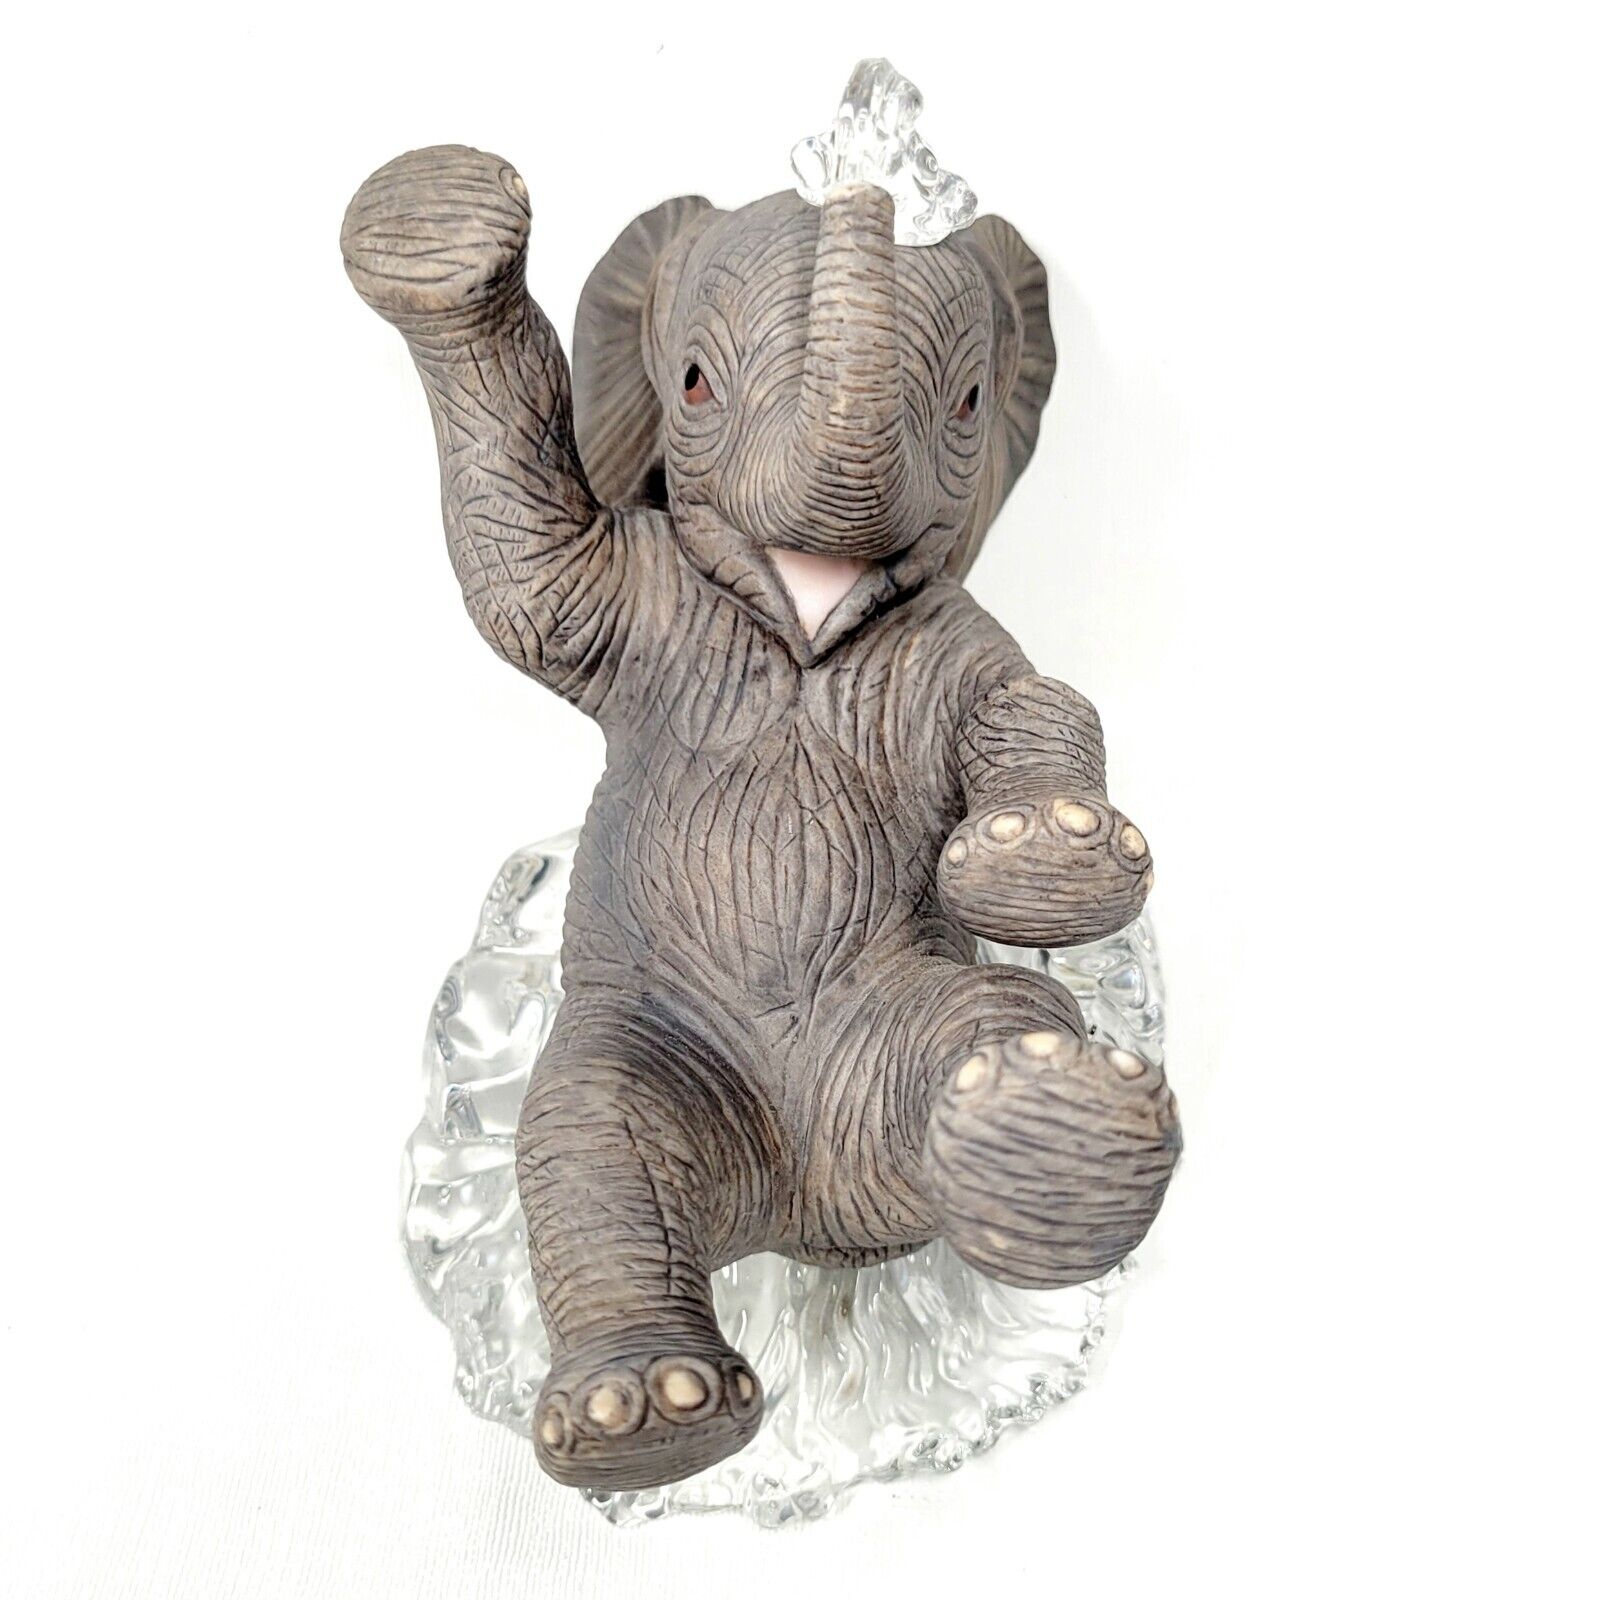 Lenox Porcelain and Portugal Crystal Baby Elephant Playing in Water Figurine